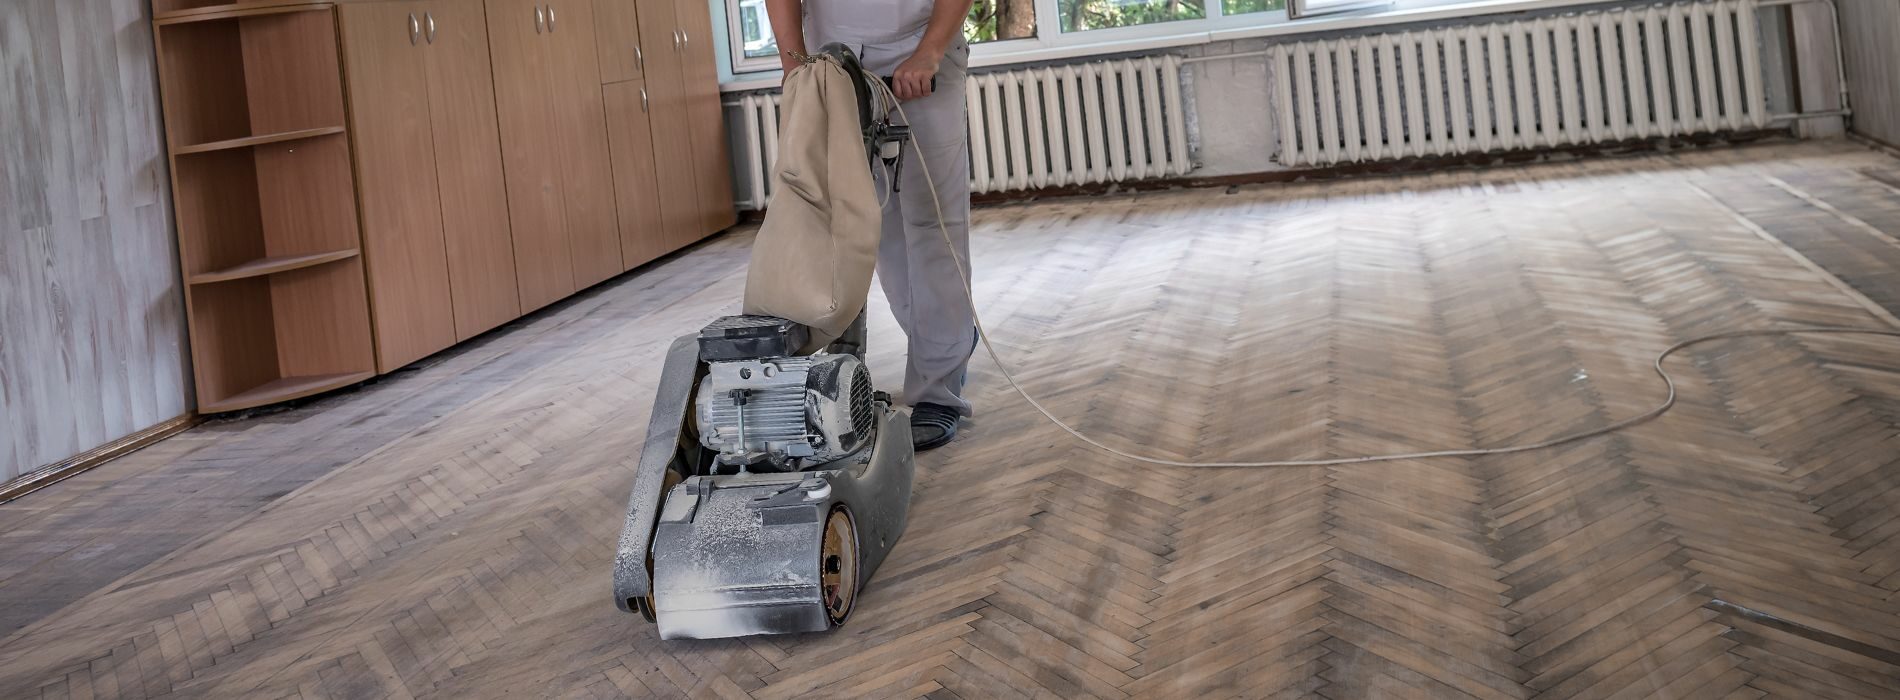 Experience professional herringbone floor sanding by Mr Sander® using the powerful Bona Belt Lite in Beddington, SM6. With an effect of 2.2 kW, this sander operates at 230 V and 50 Hz. Measuring 200x750 mm, it ensures excellent coverage and precision.